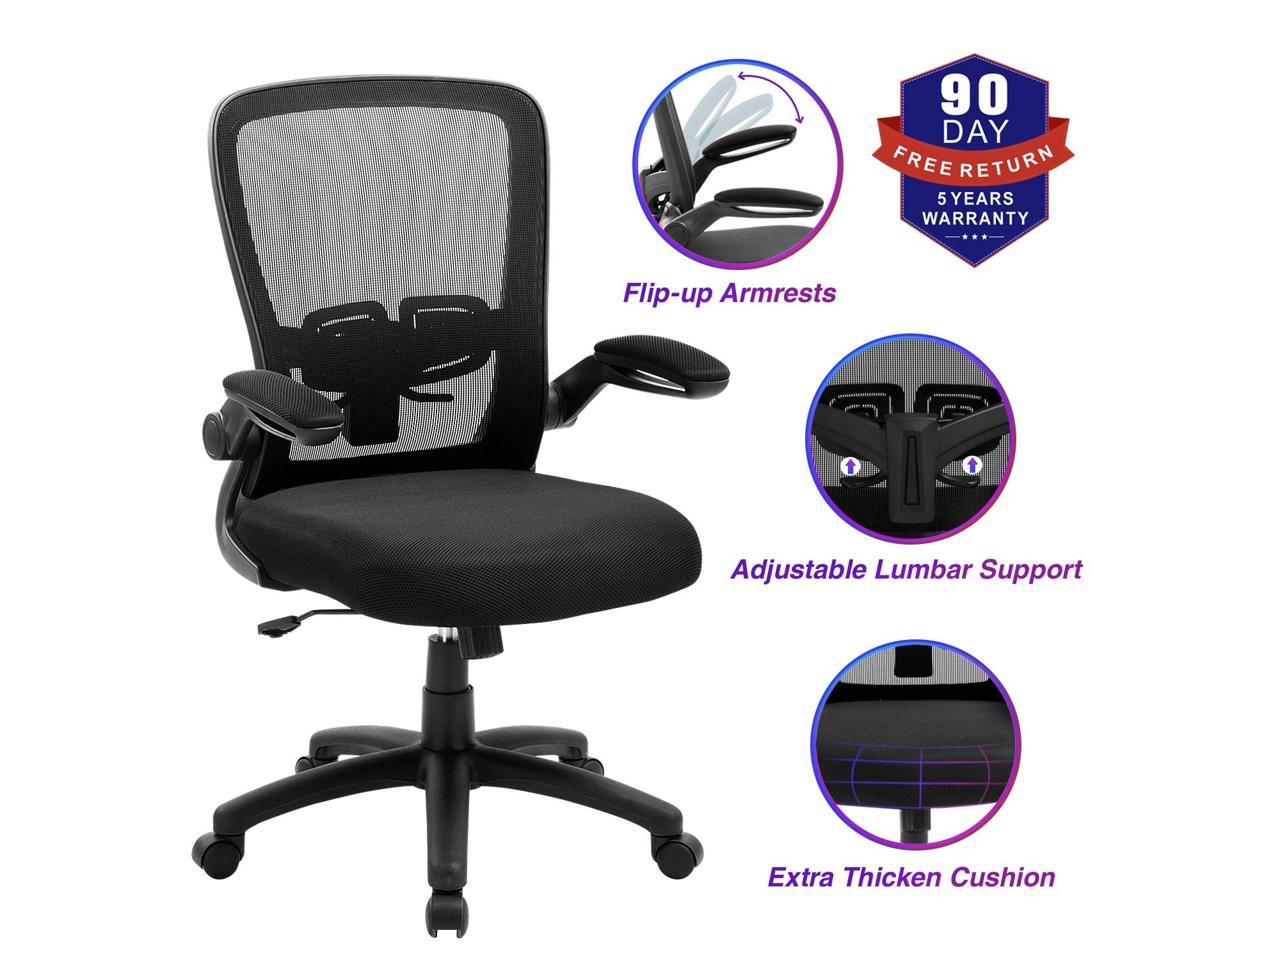 KLASIKA Mesh Ergonomic Desk Chair with Flip-up Arm Rest and Lumbar Support 